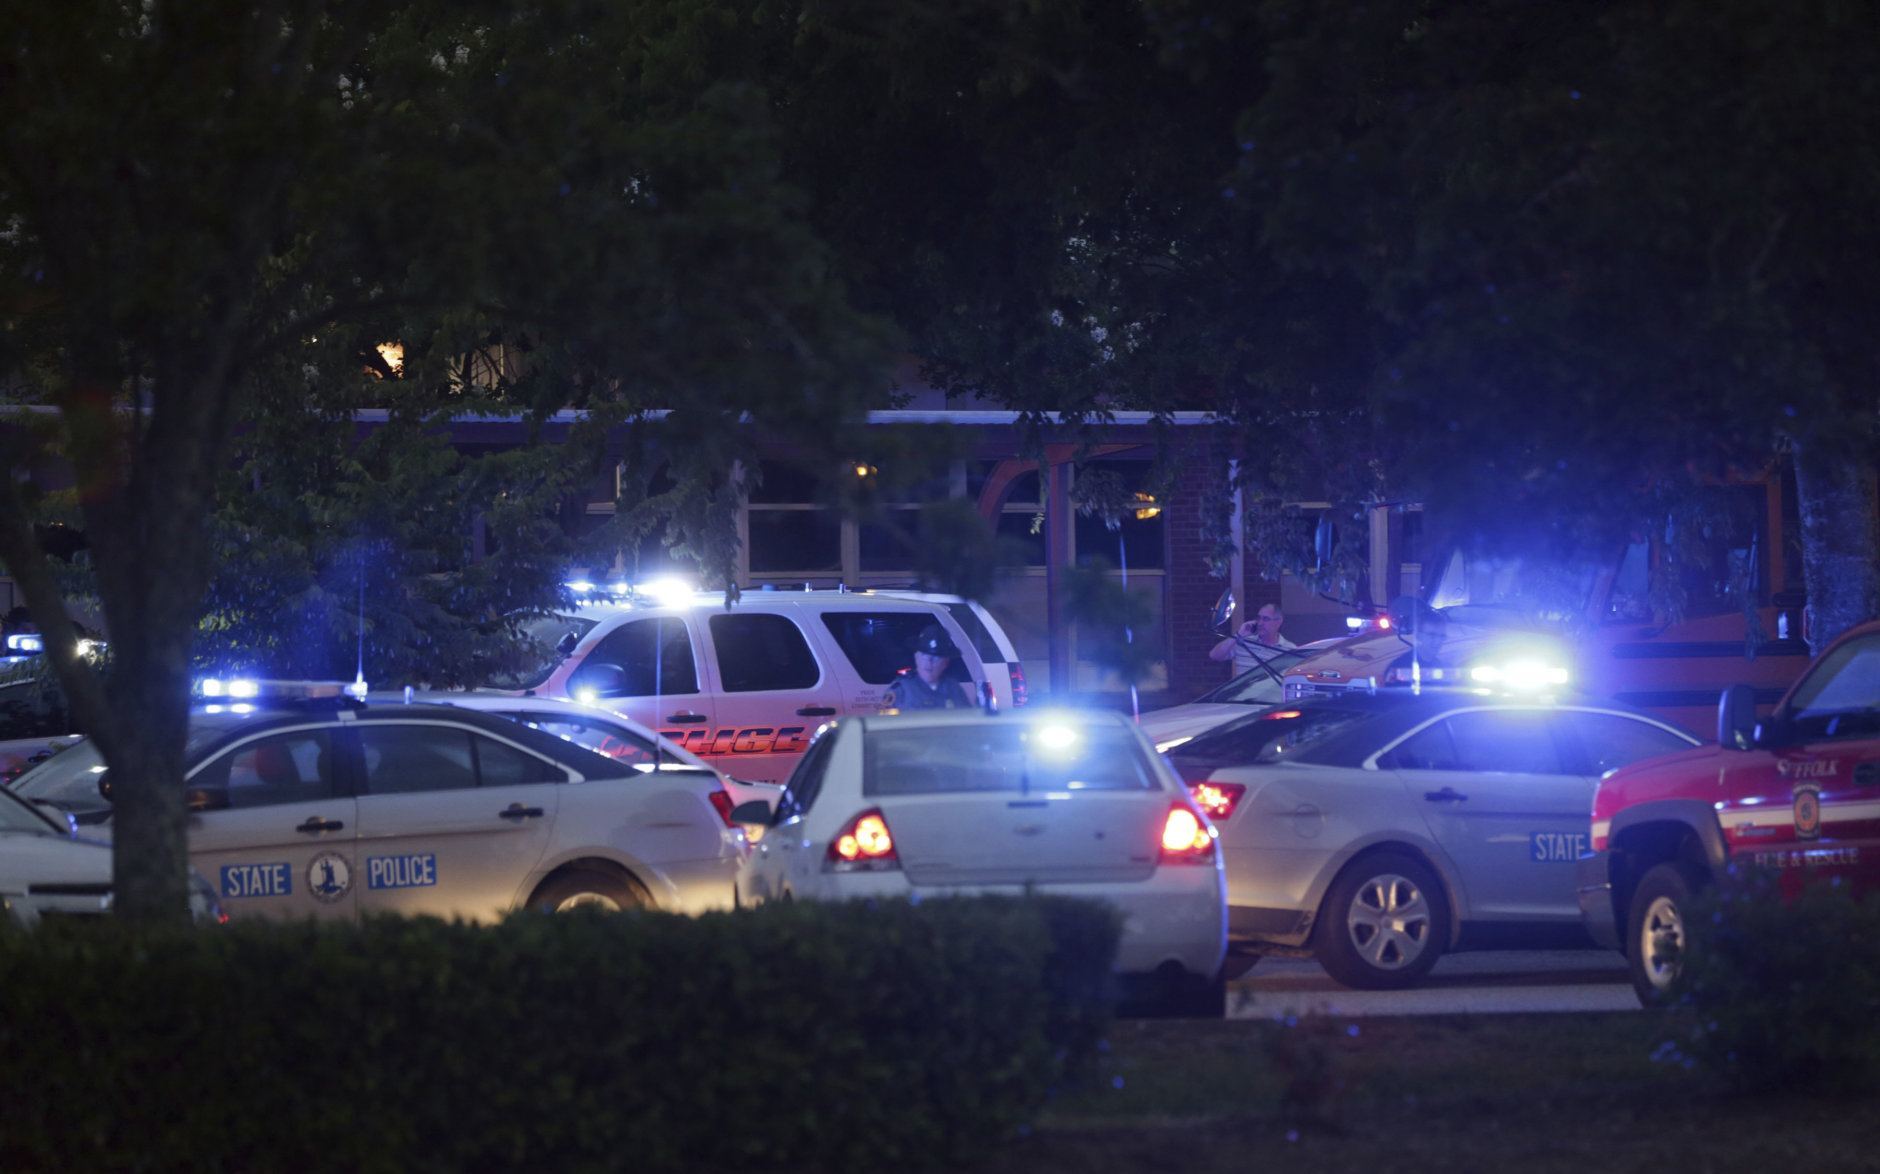 Emergency vehicles fill the parking lot at  the Princess Anne Middle School in Virginia Beach, Va, on Friday, May 31, 2019. A longtime city employee opened fire at a municipal building in Virginia Beach on Friday, killing 11 people before police shot and killed him, authorities said. Six other people were wounded in the shooting, including a police officer whose bulletproof vest saved his life, said Virginia Beach Police Chief James Cervera. (AP Photo/Vicki Cronis-Nohe)